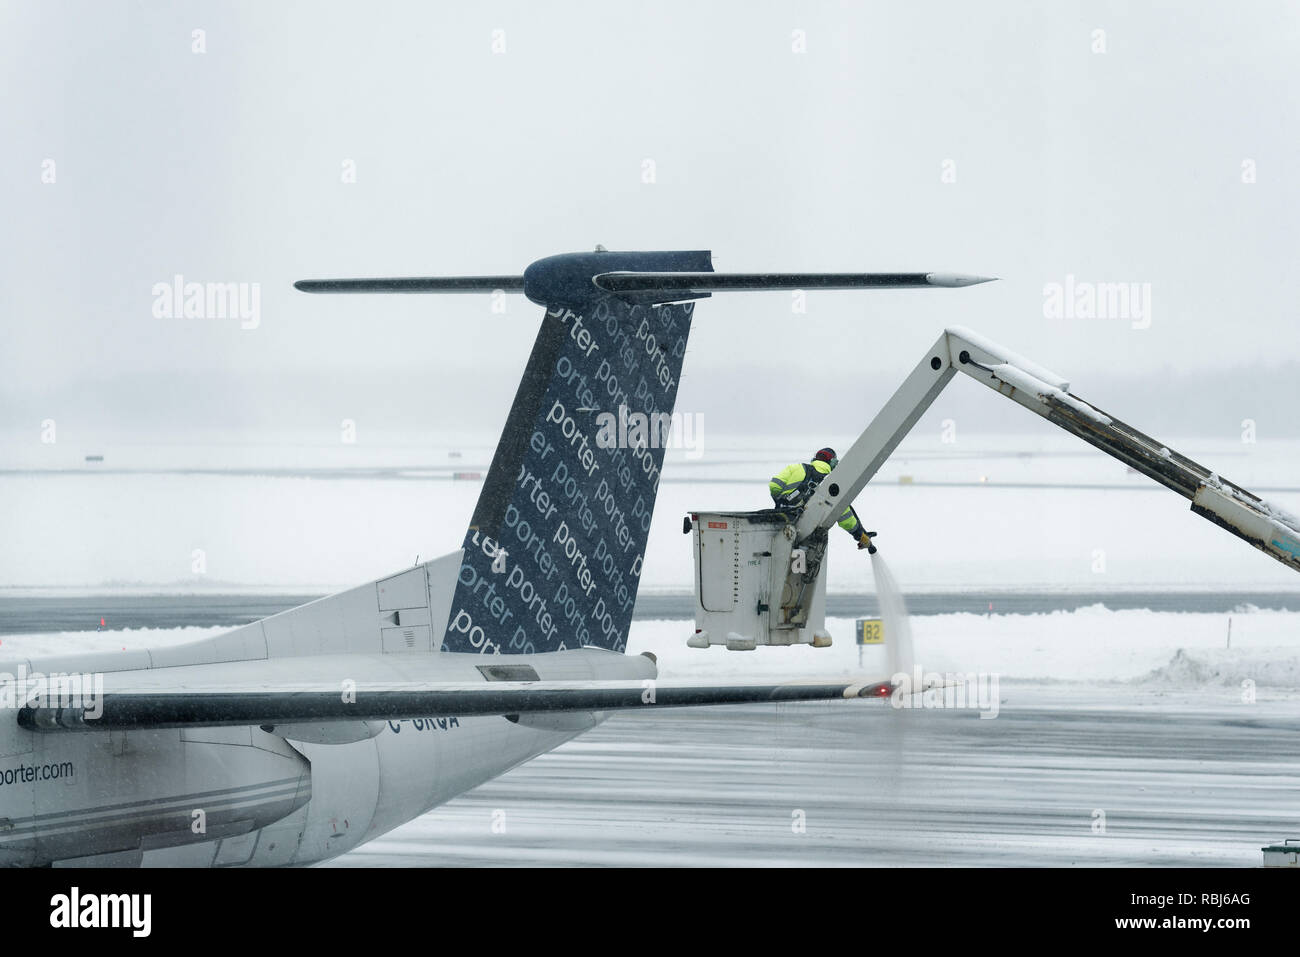 An aiport employee spraying de-icer on an aircraft's wings in winter, getting the plane ready for departure. Quebec City Jean Lesage airport. Stock Photo